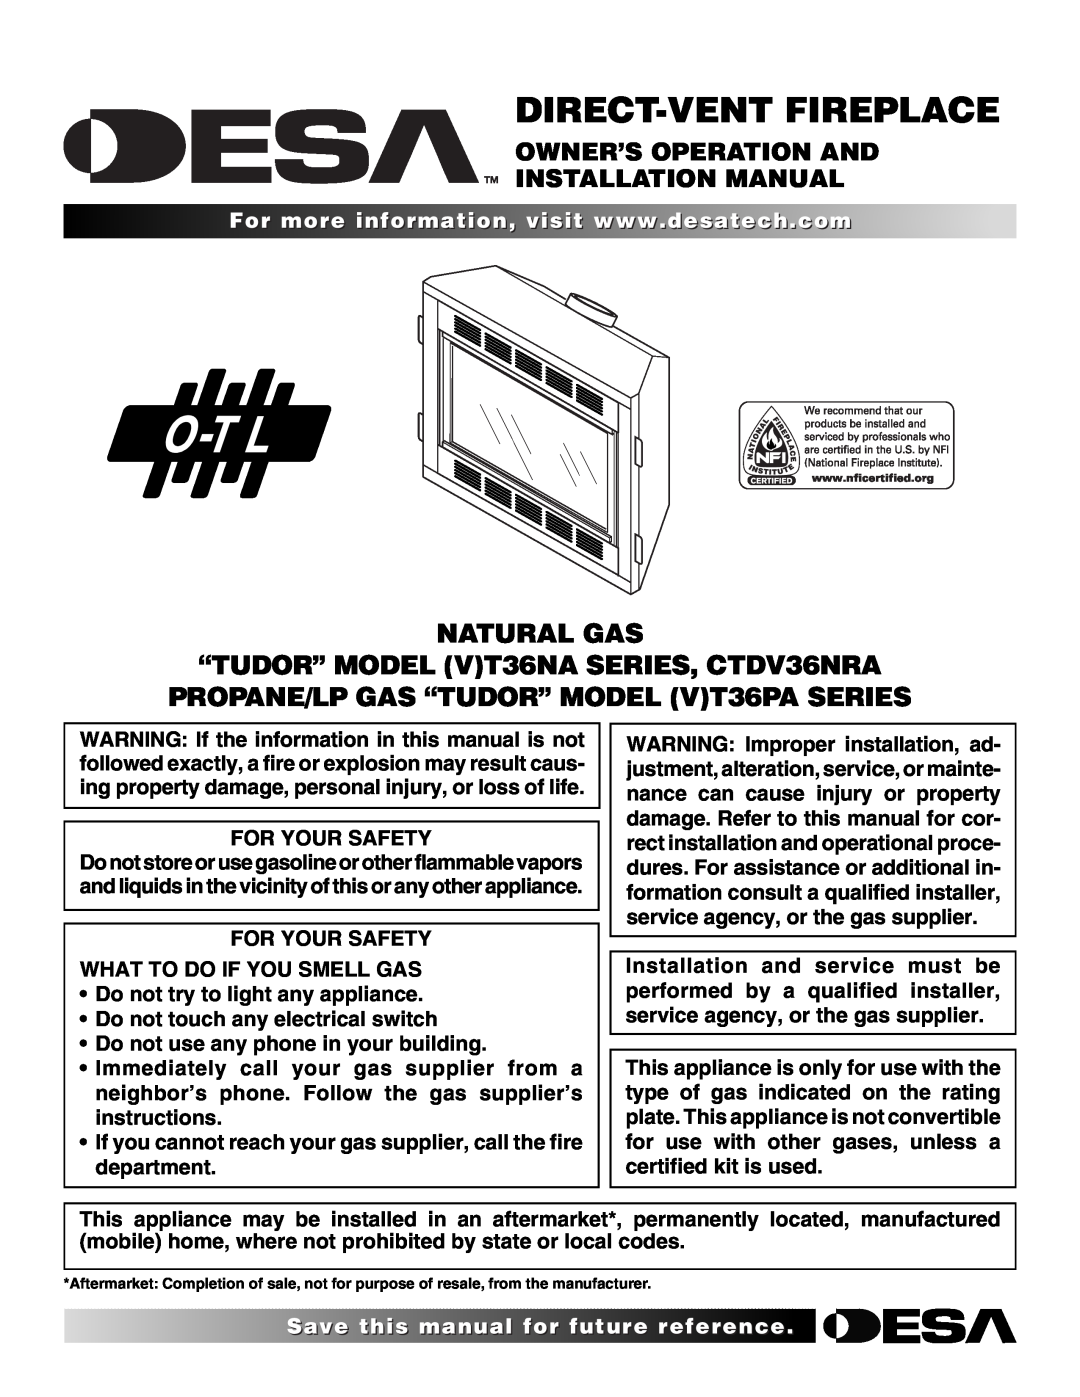 Desa (V)T36NA SERIES installation manual For Your Safety What To Do If You Smell Gas, Save thisfor, Natural Gas 